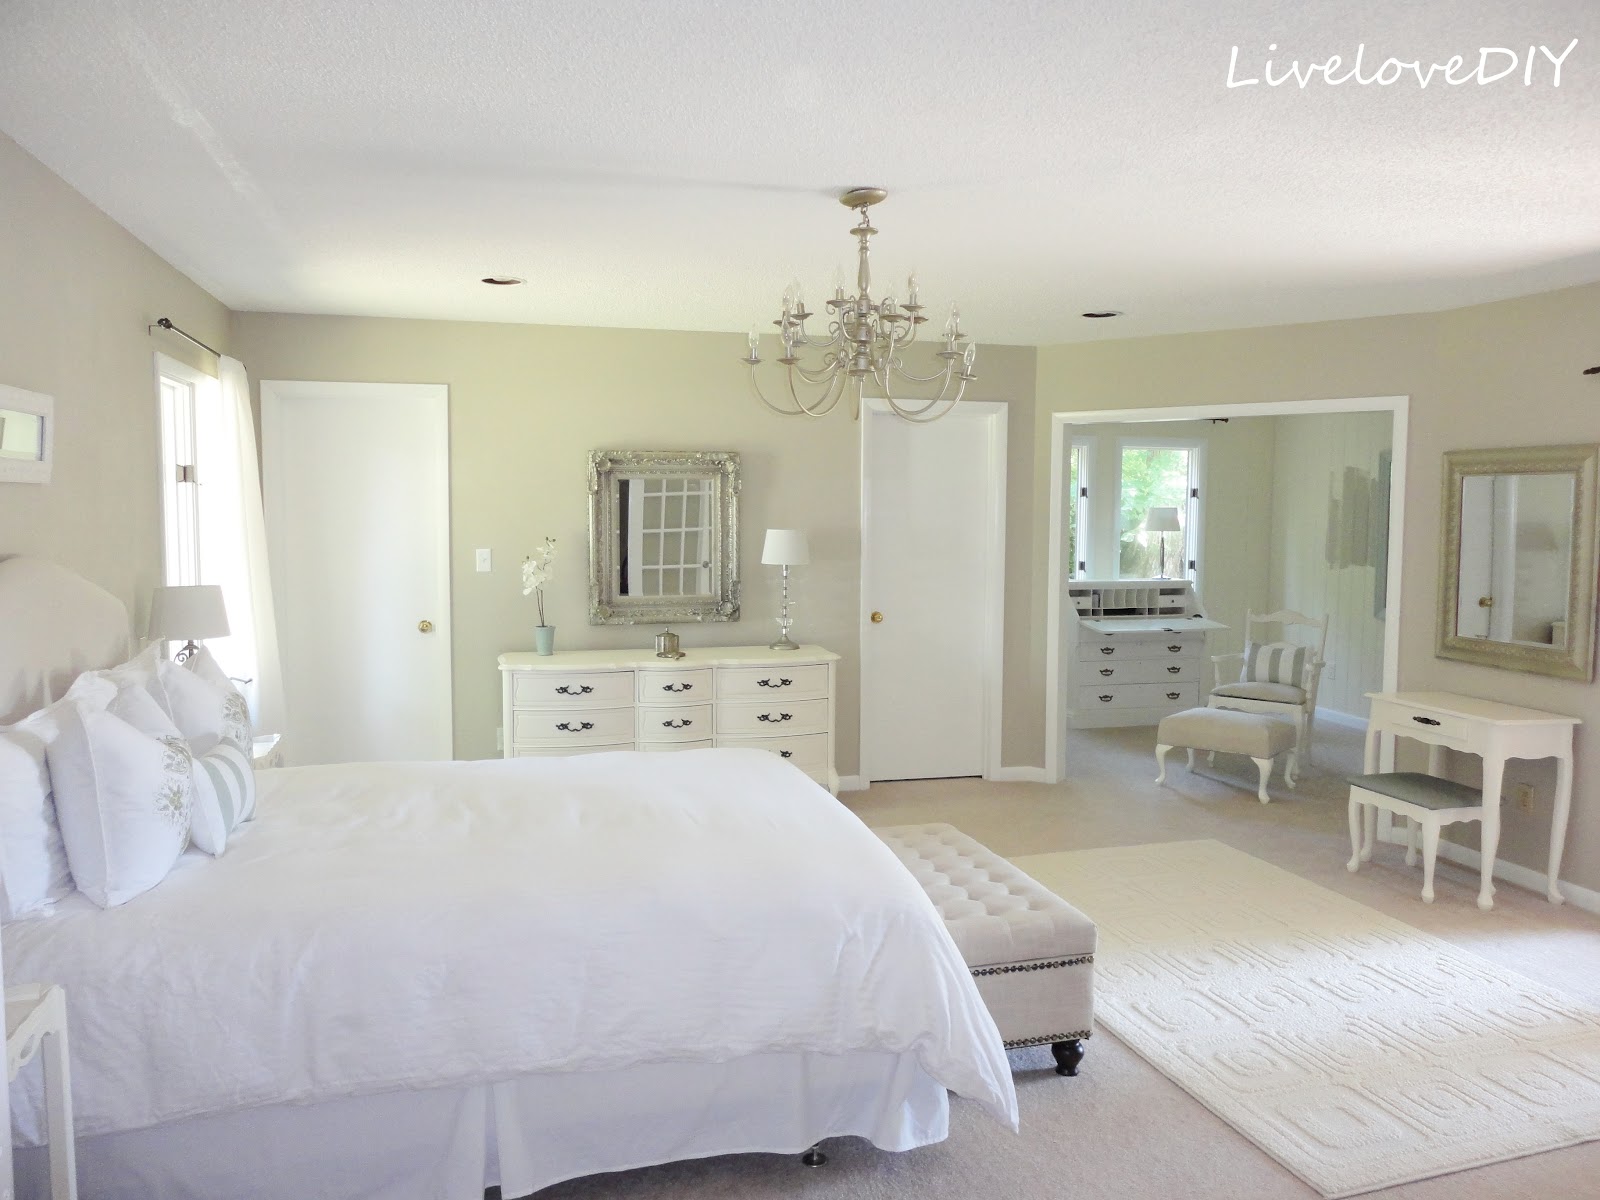 LiveLoveDIY: Our Master Bedroom: The latest changes